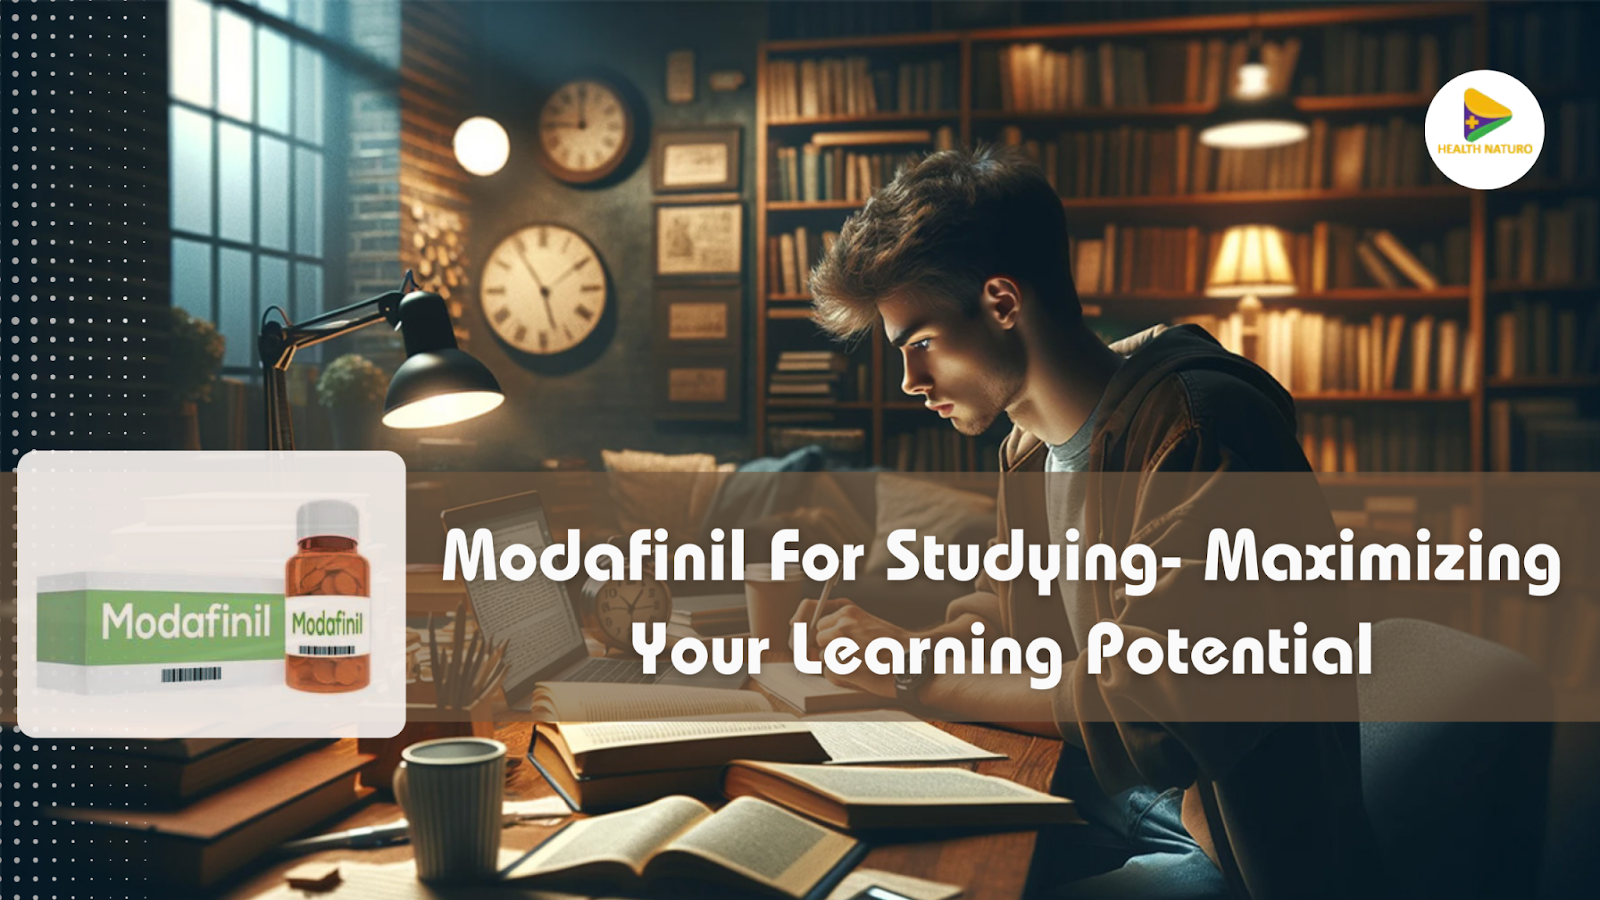 Modafinil For Studying- Maximizing Your Learning Potential